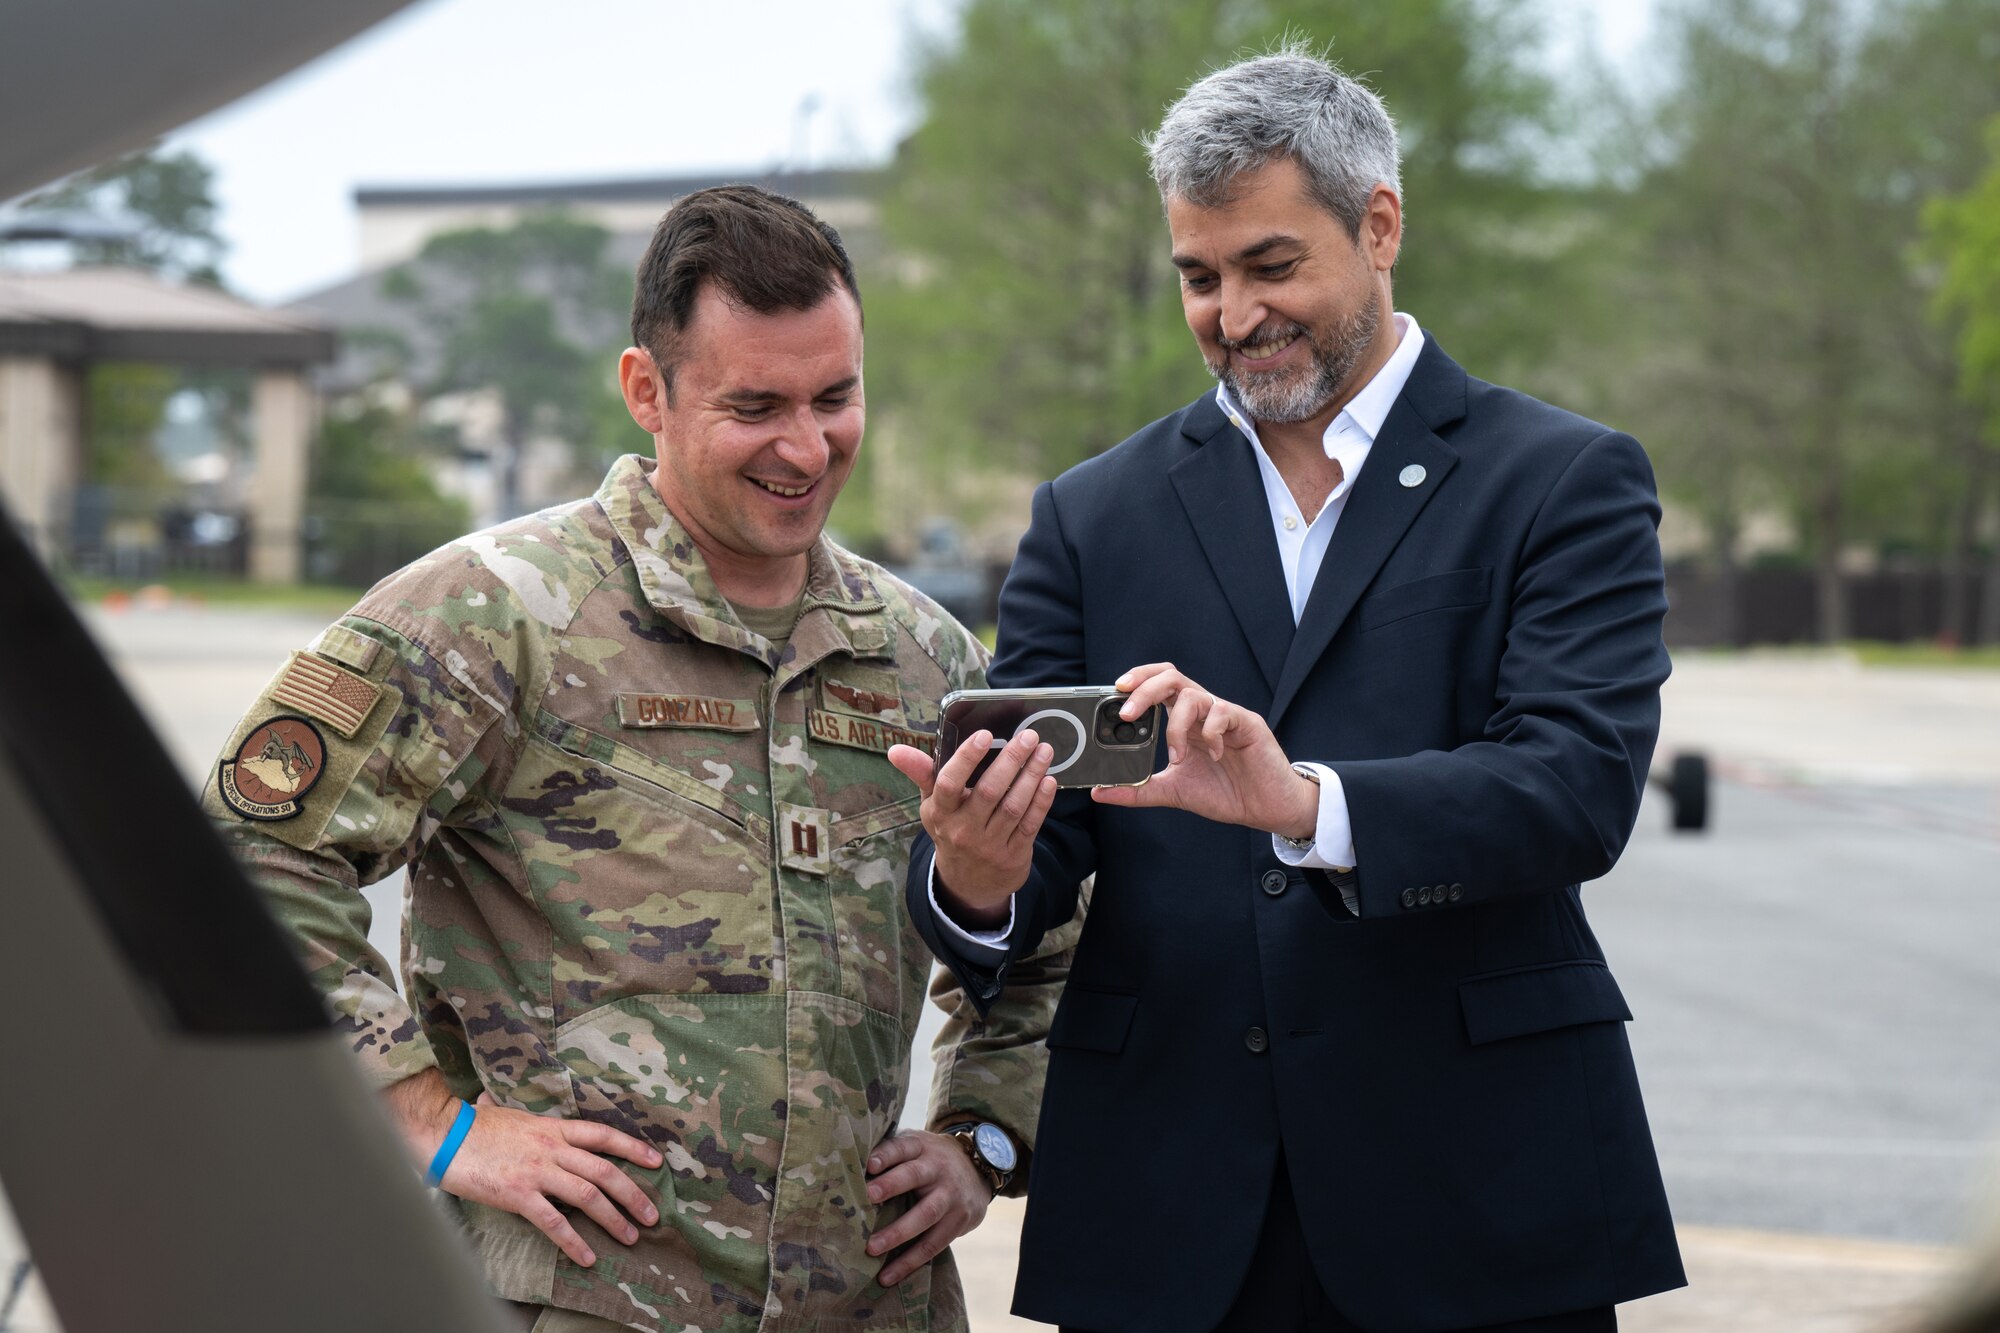 President Mario Abdo Benítez of the Republic of Paraguay views a PC-12 static display while Capt. Luiz Gonzalez, 34th Special Operations Squadron, explains the aircraft’s mission at Hurlburt Field, Fla., March 31, 2023.